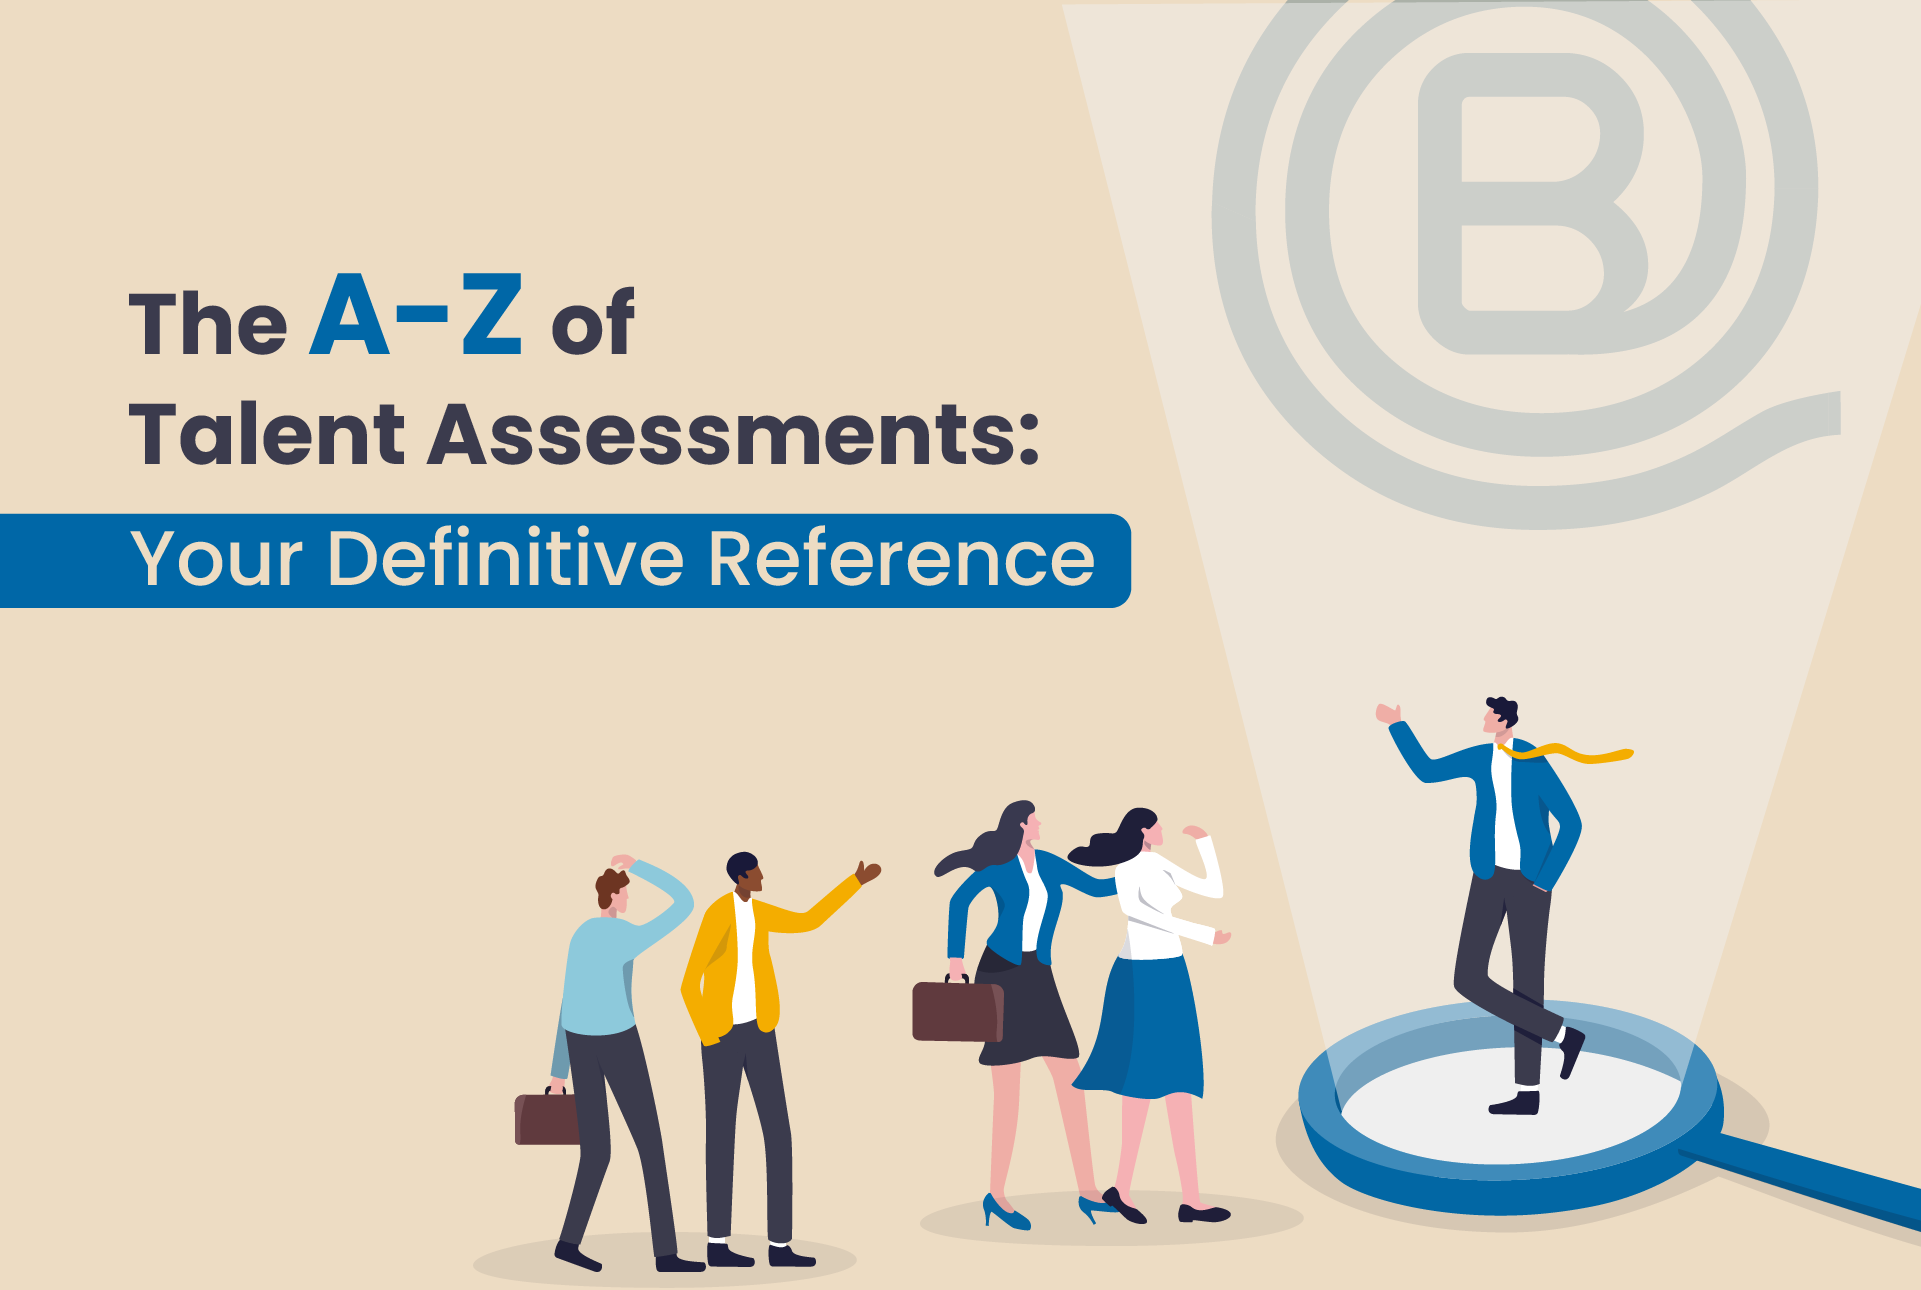 The A-Z of Talent Assessments: Your Definitive Reference